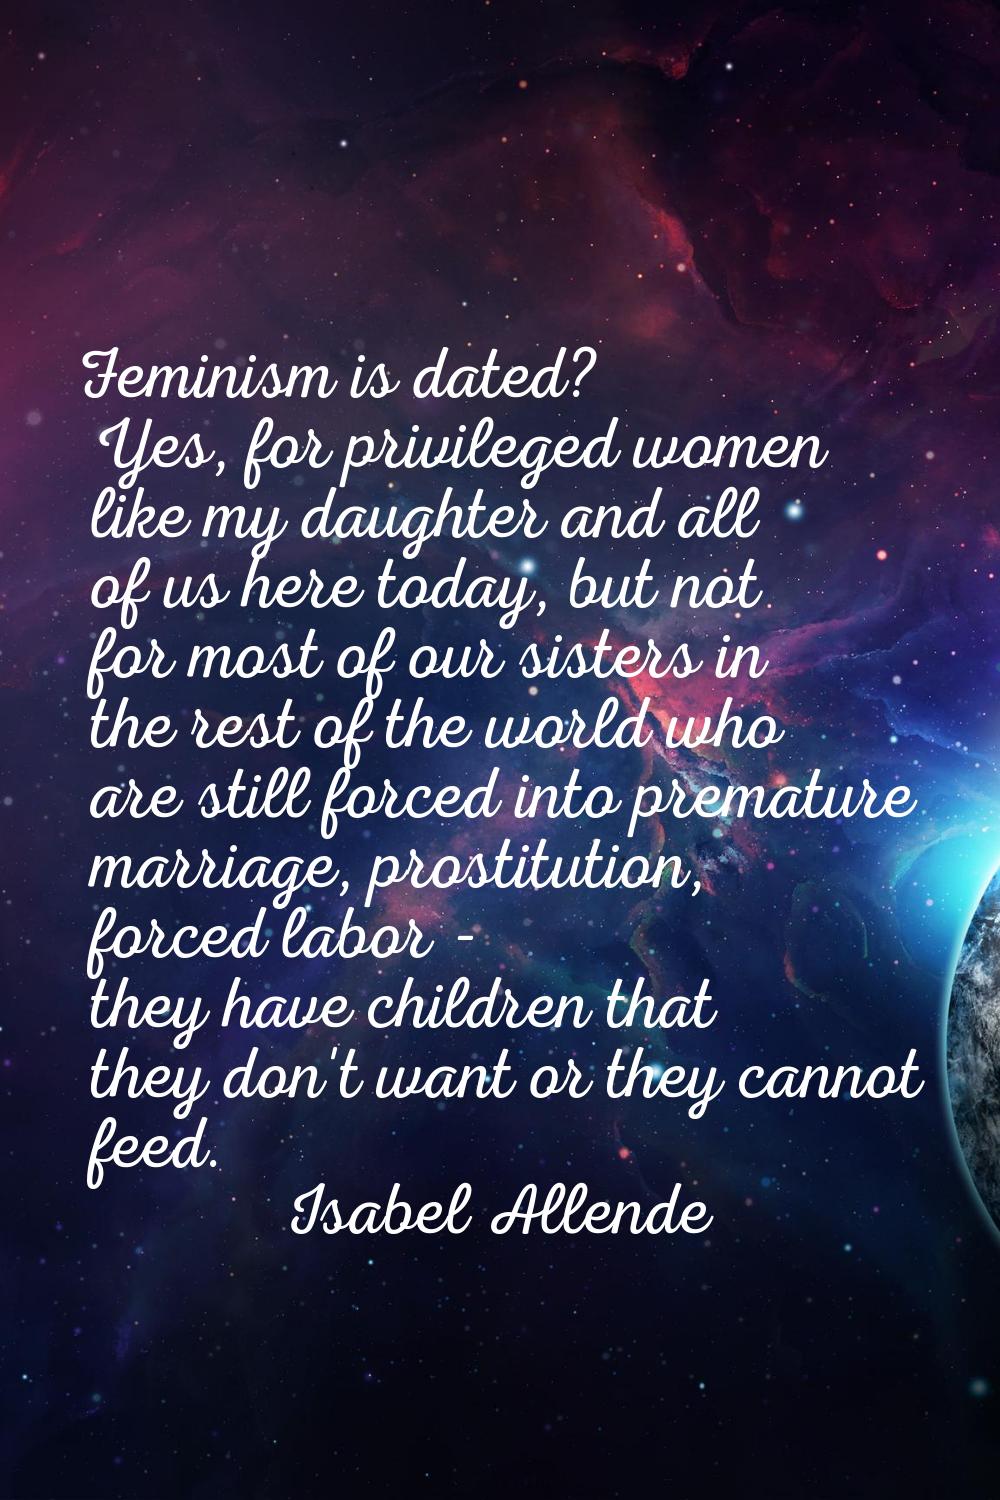 Feminism is dated? Yes, for privileged women like my daughter and all of us here today, but not for